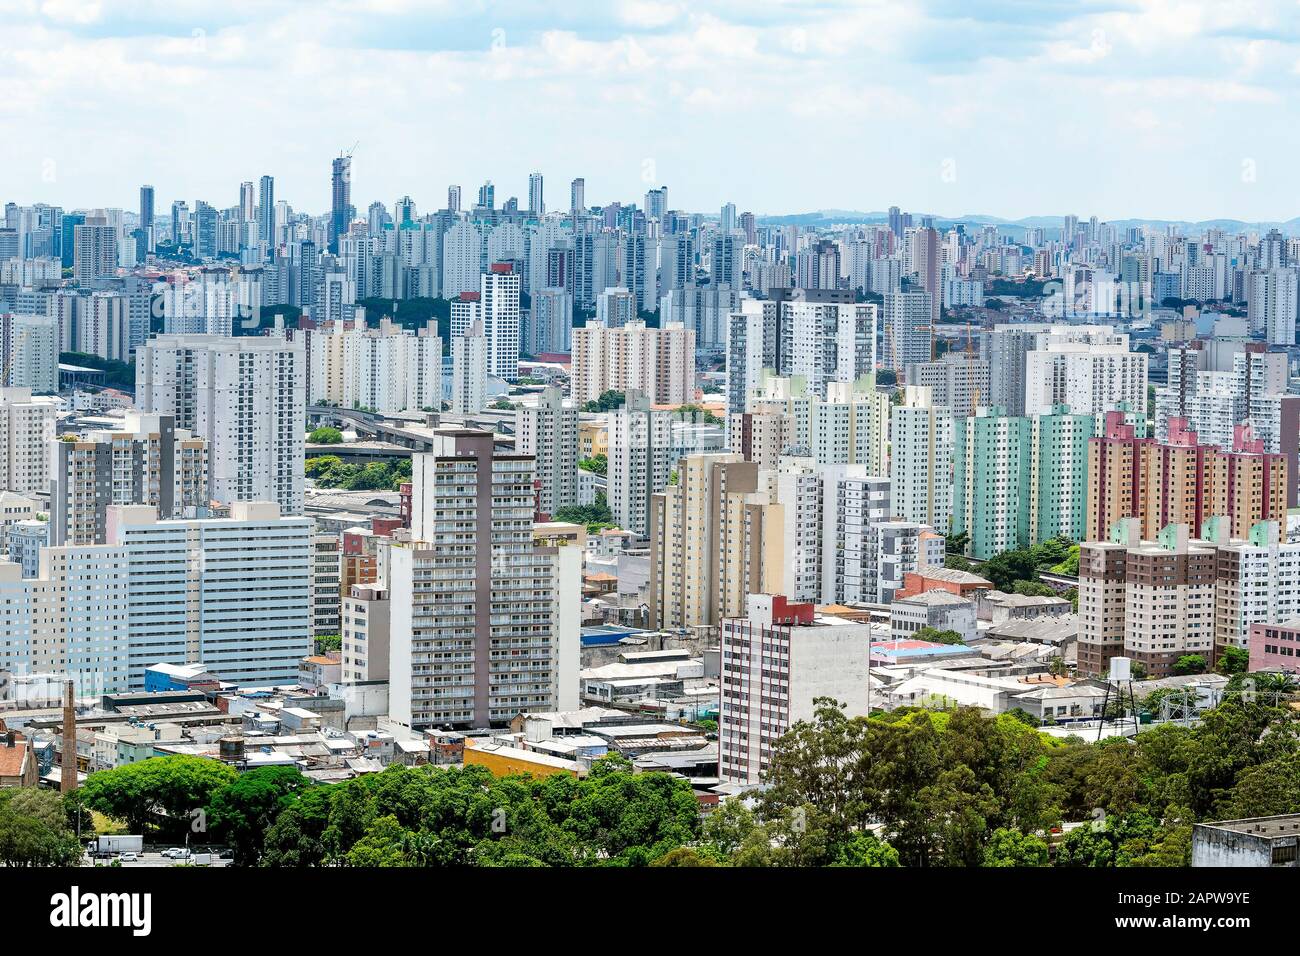 https://c8.alamy.com/comp/2APW9YE/aerial-view-of-bras-neighborhood-region-of-the-city-of-sao-paulo-sp-brazil-during-the-day-view-of-a-big-south-american-city-2APW9YE.jpg